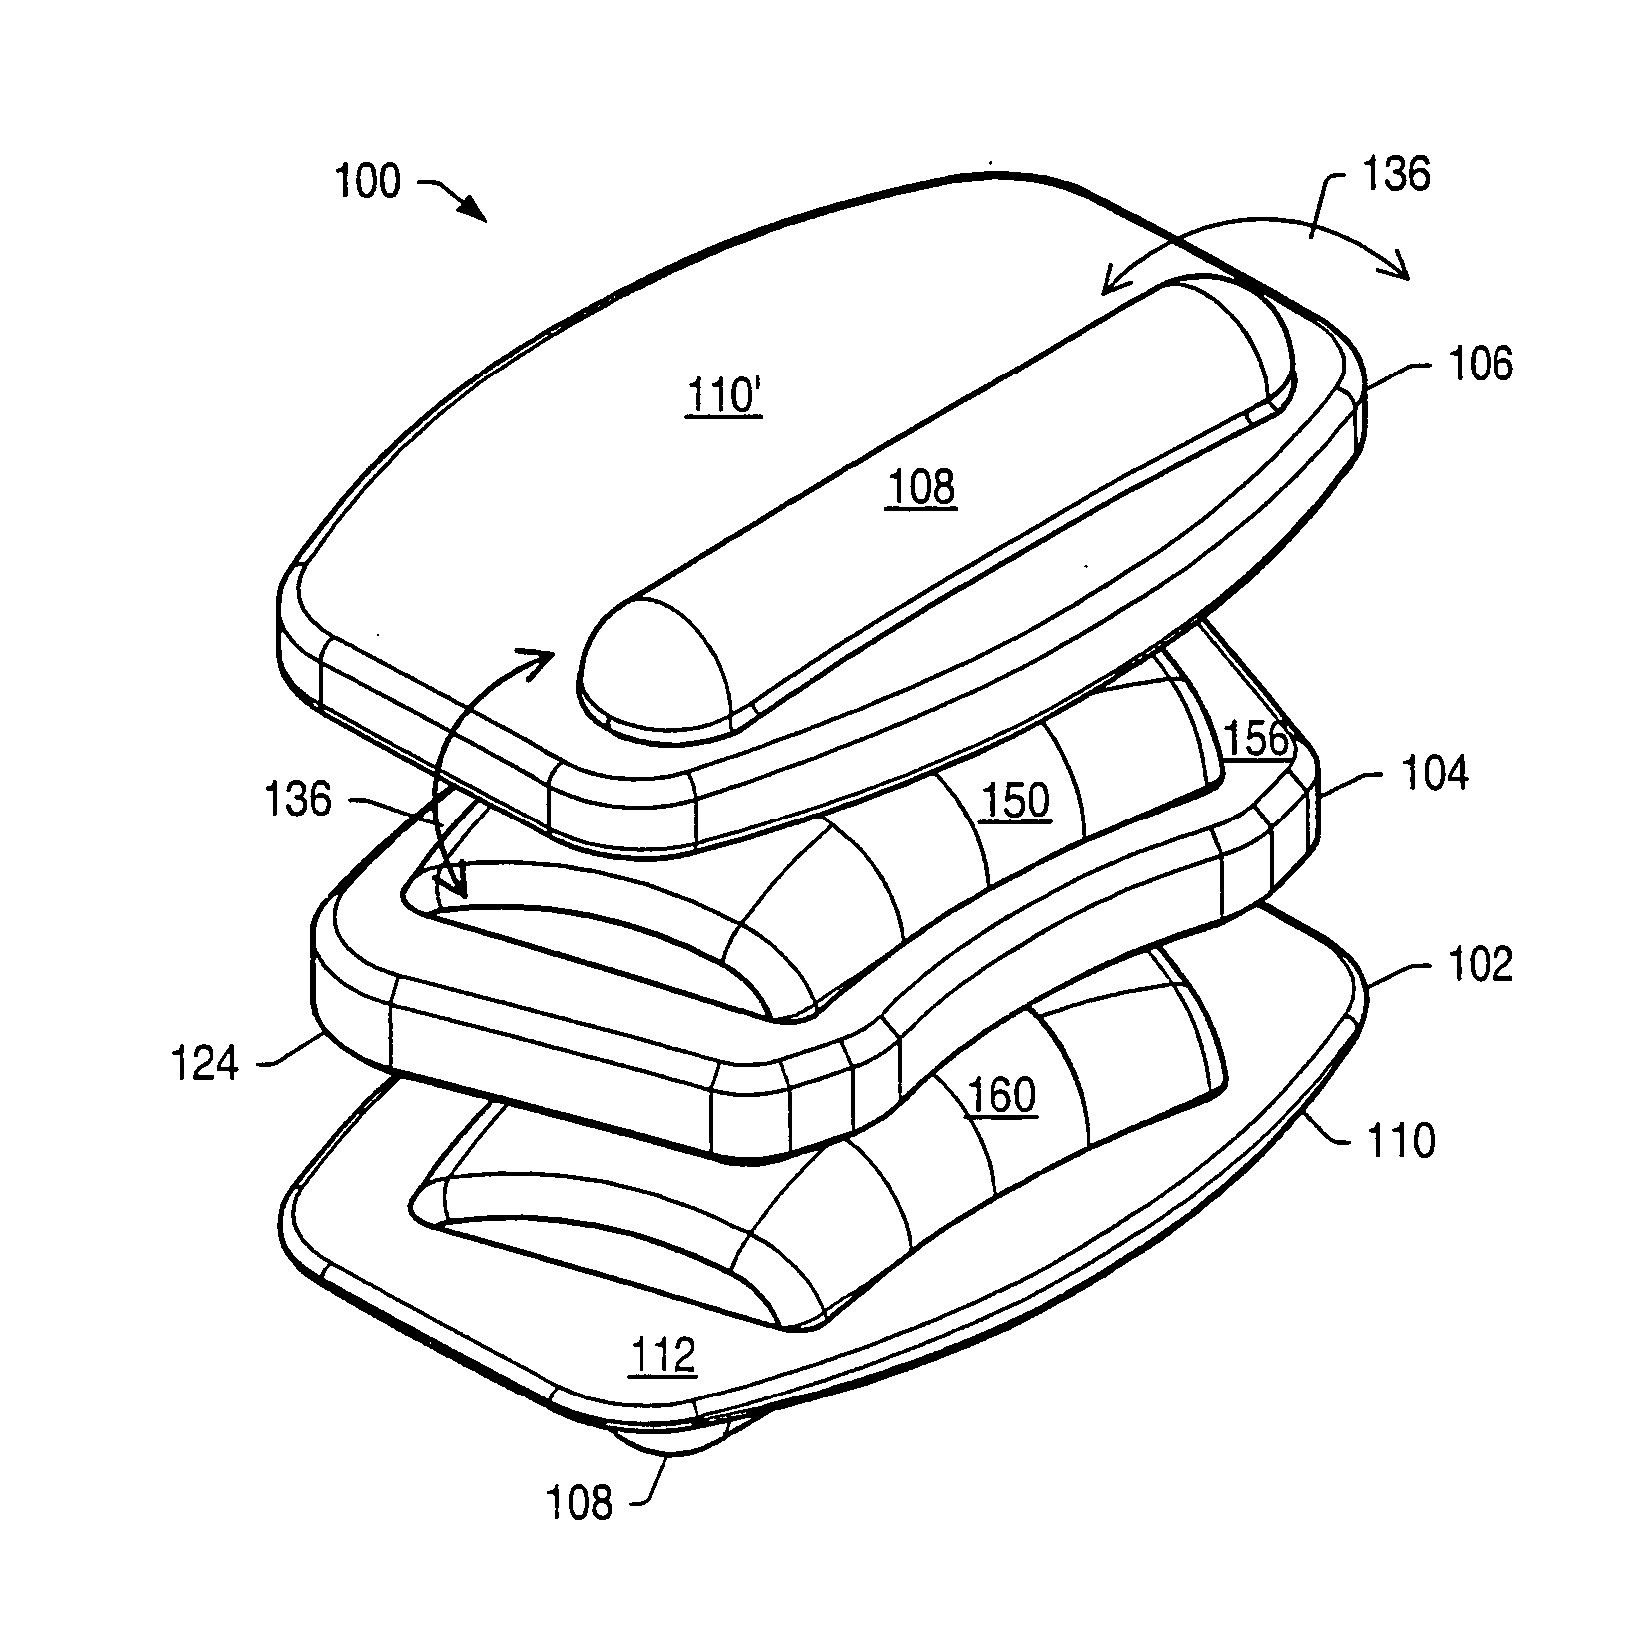 Movable disc implant